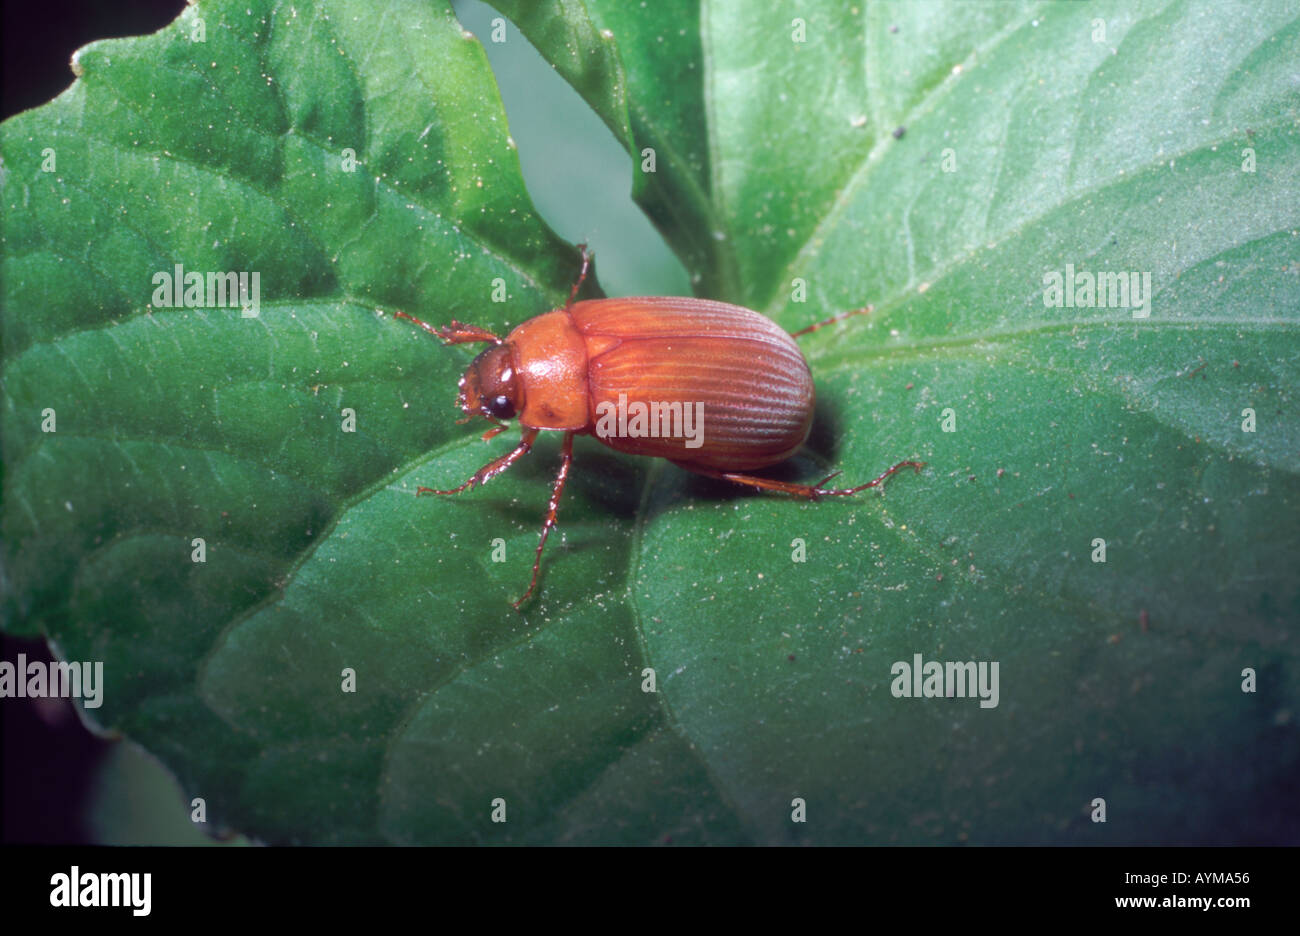 Asiatic Garden Beetle And Introduced Pest In The Usa Stock Photo